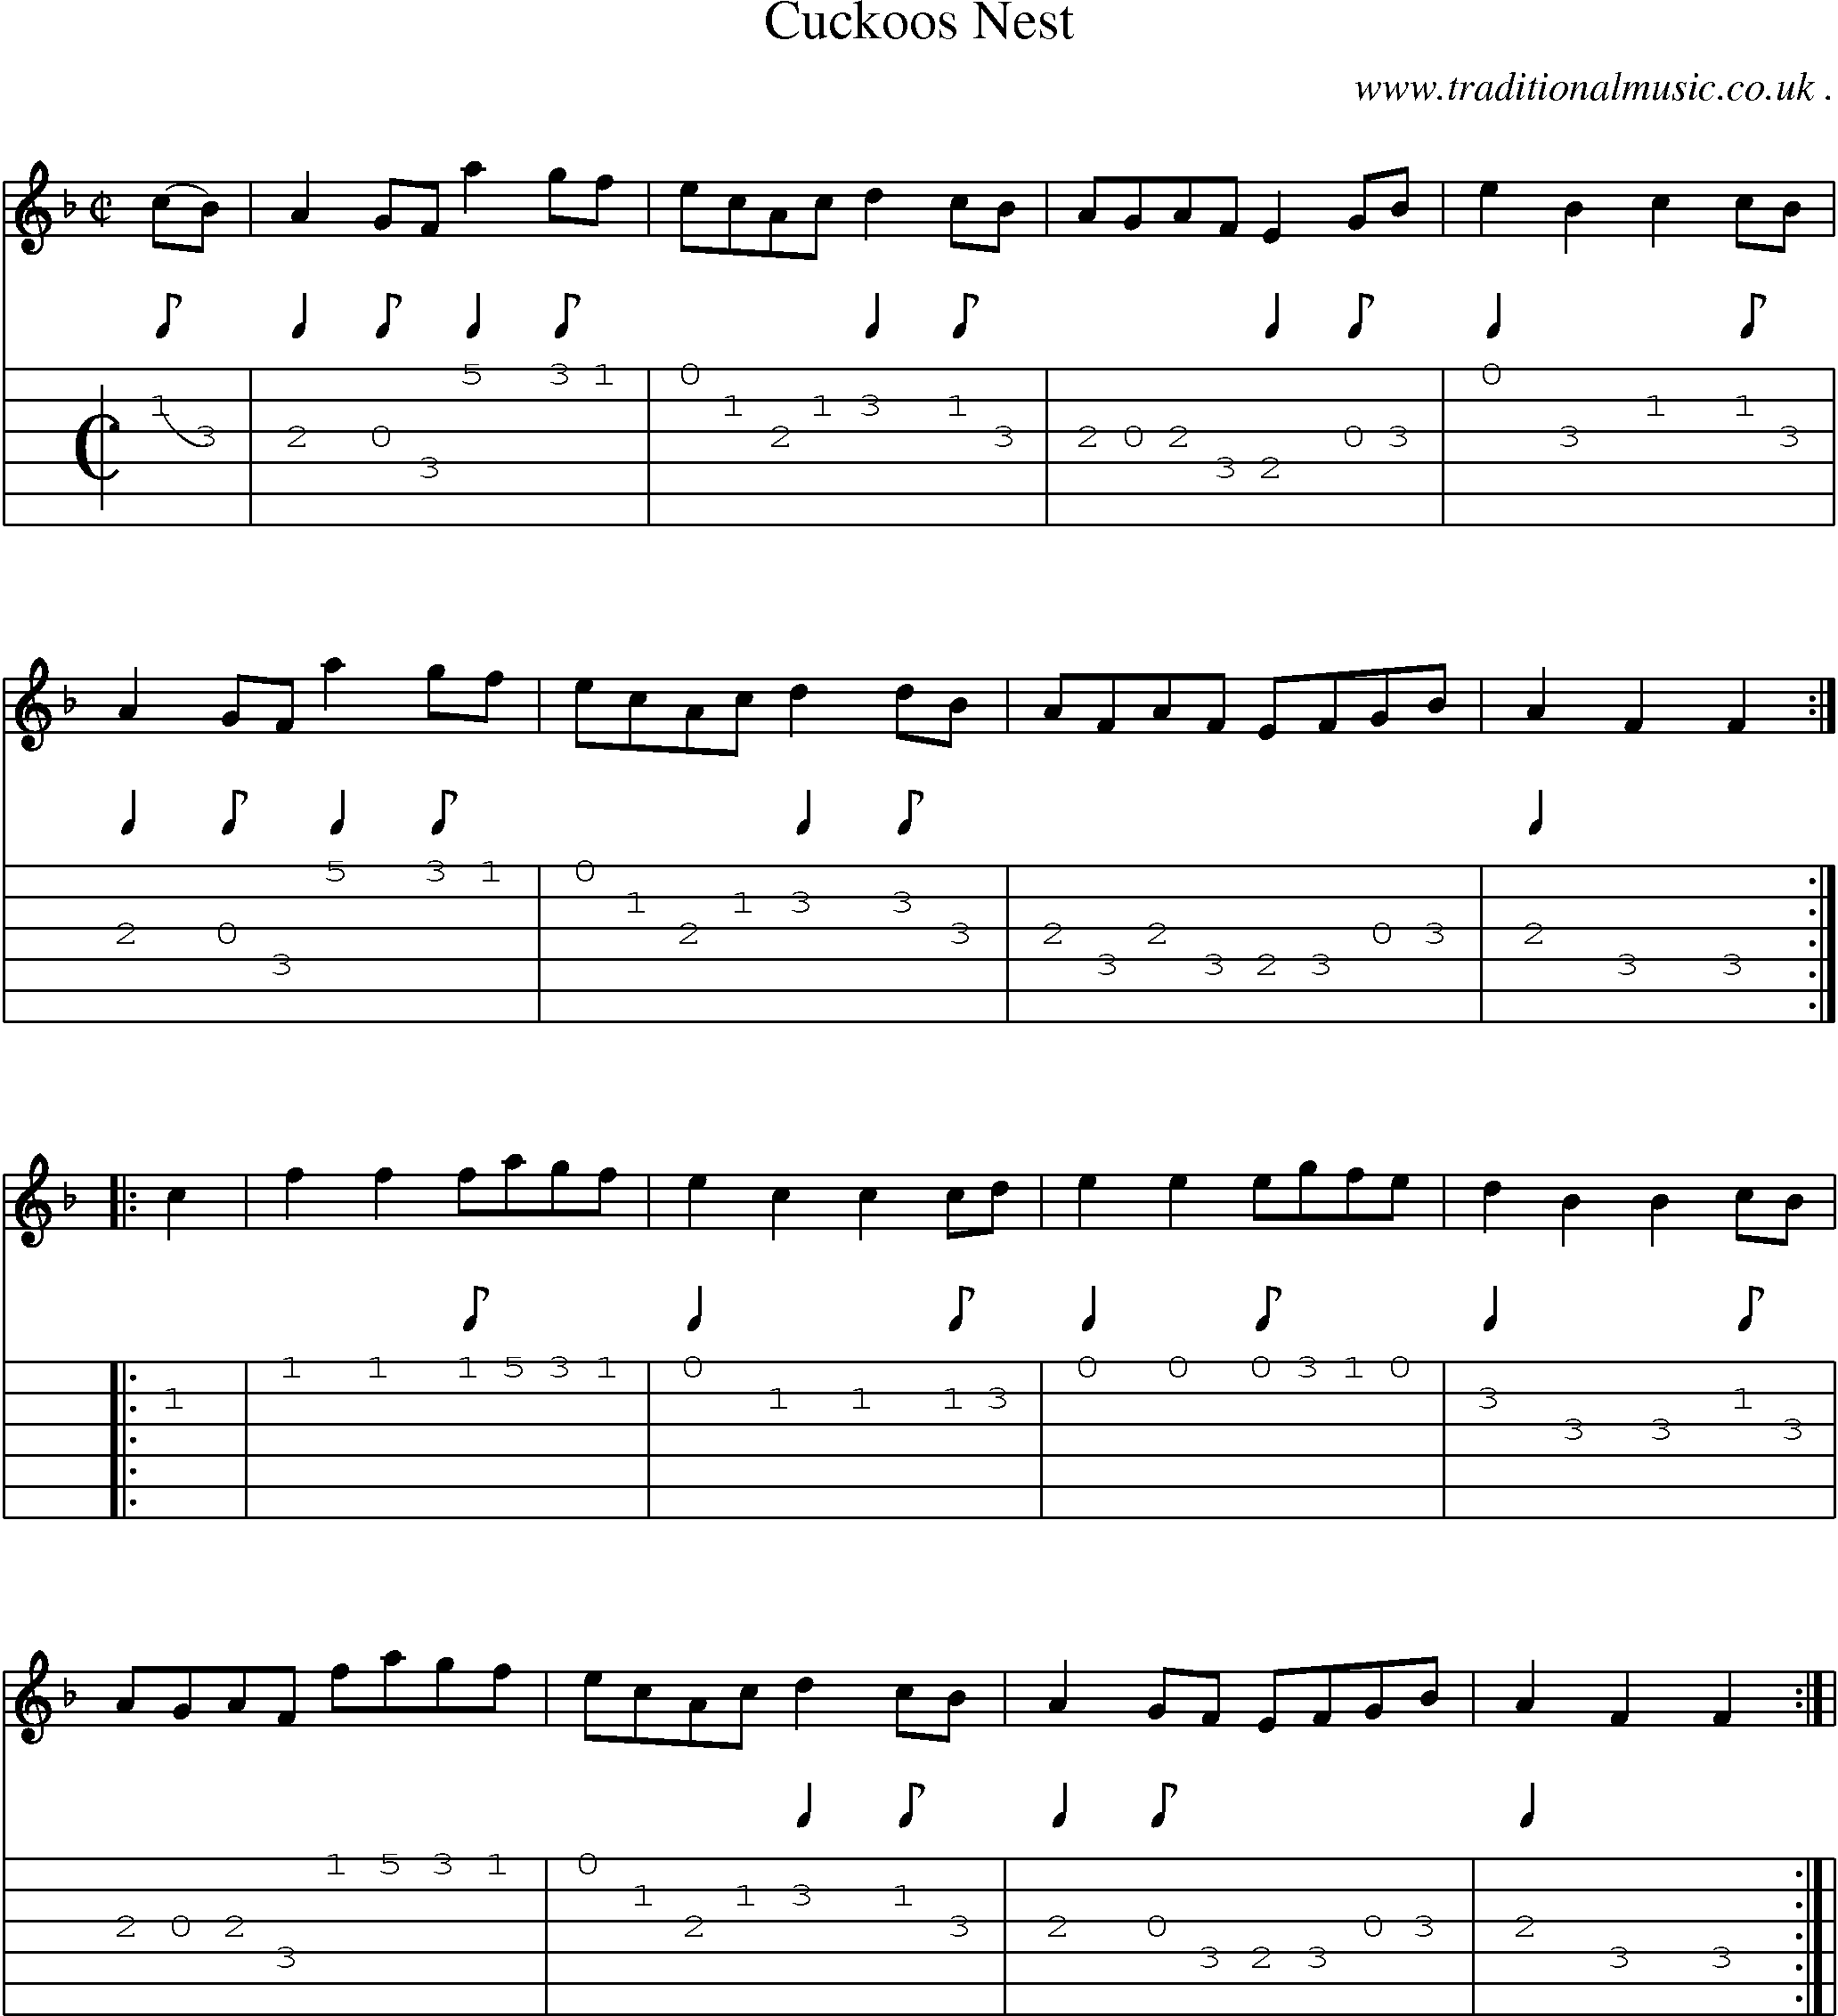 Sheet-Music and Guitar Tabs for Cuckoos Nest